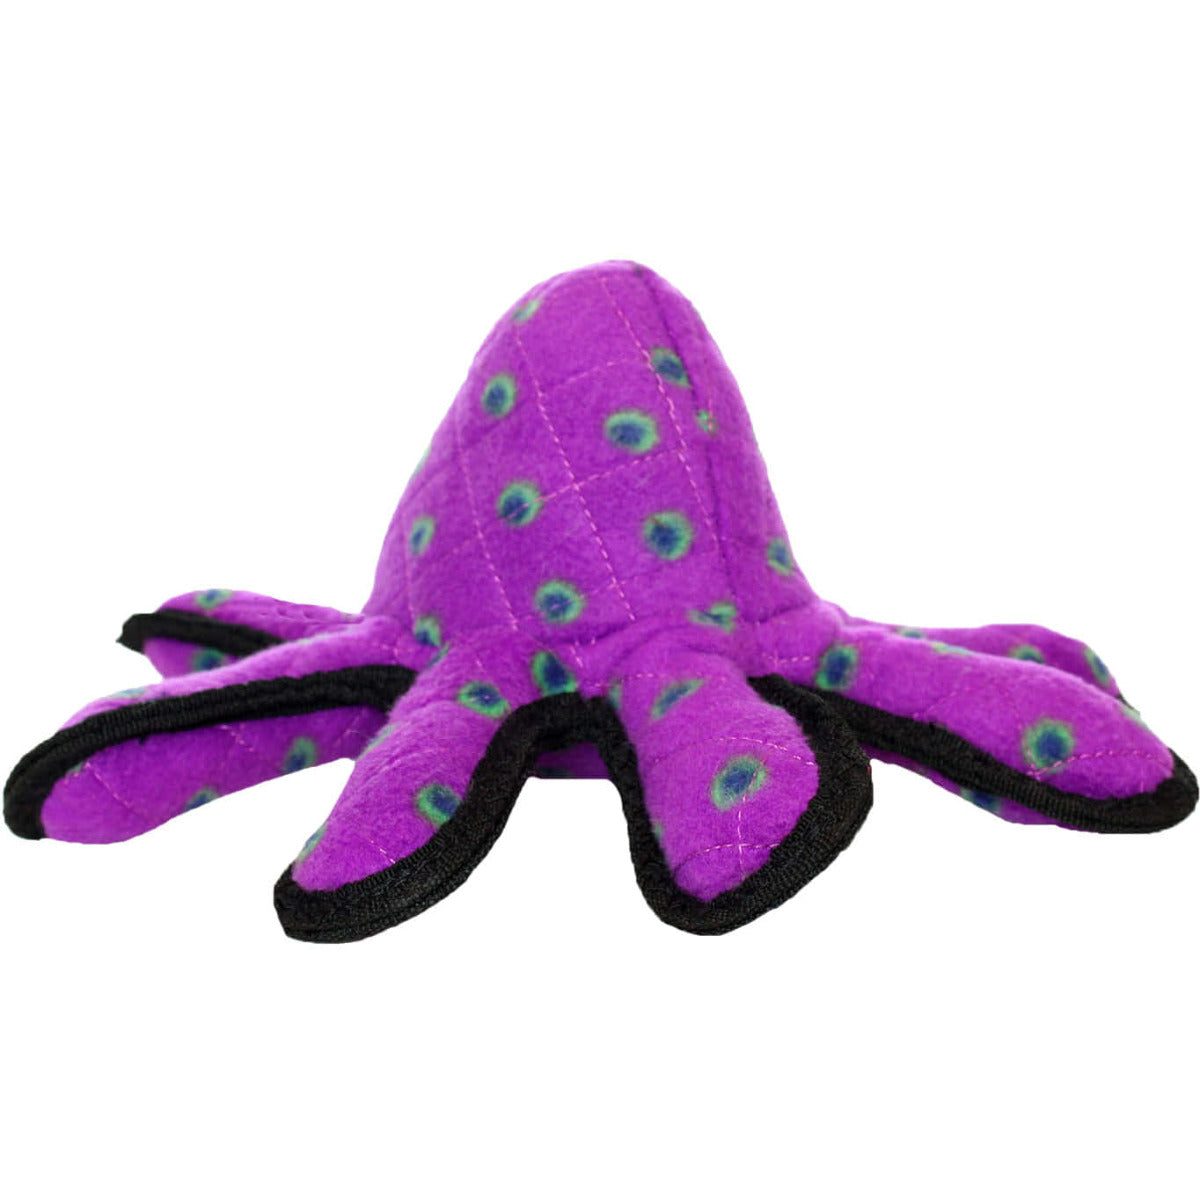 Squeaky Octopus Dog Toys Soft Dog Toys for Small Dogs Plush